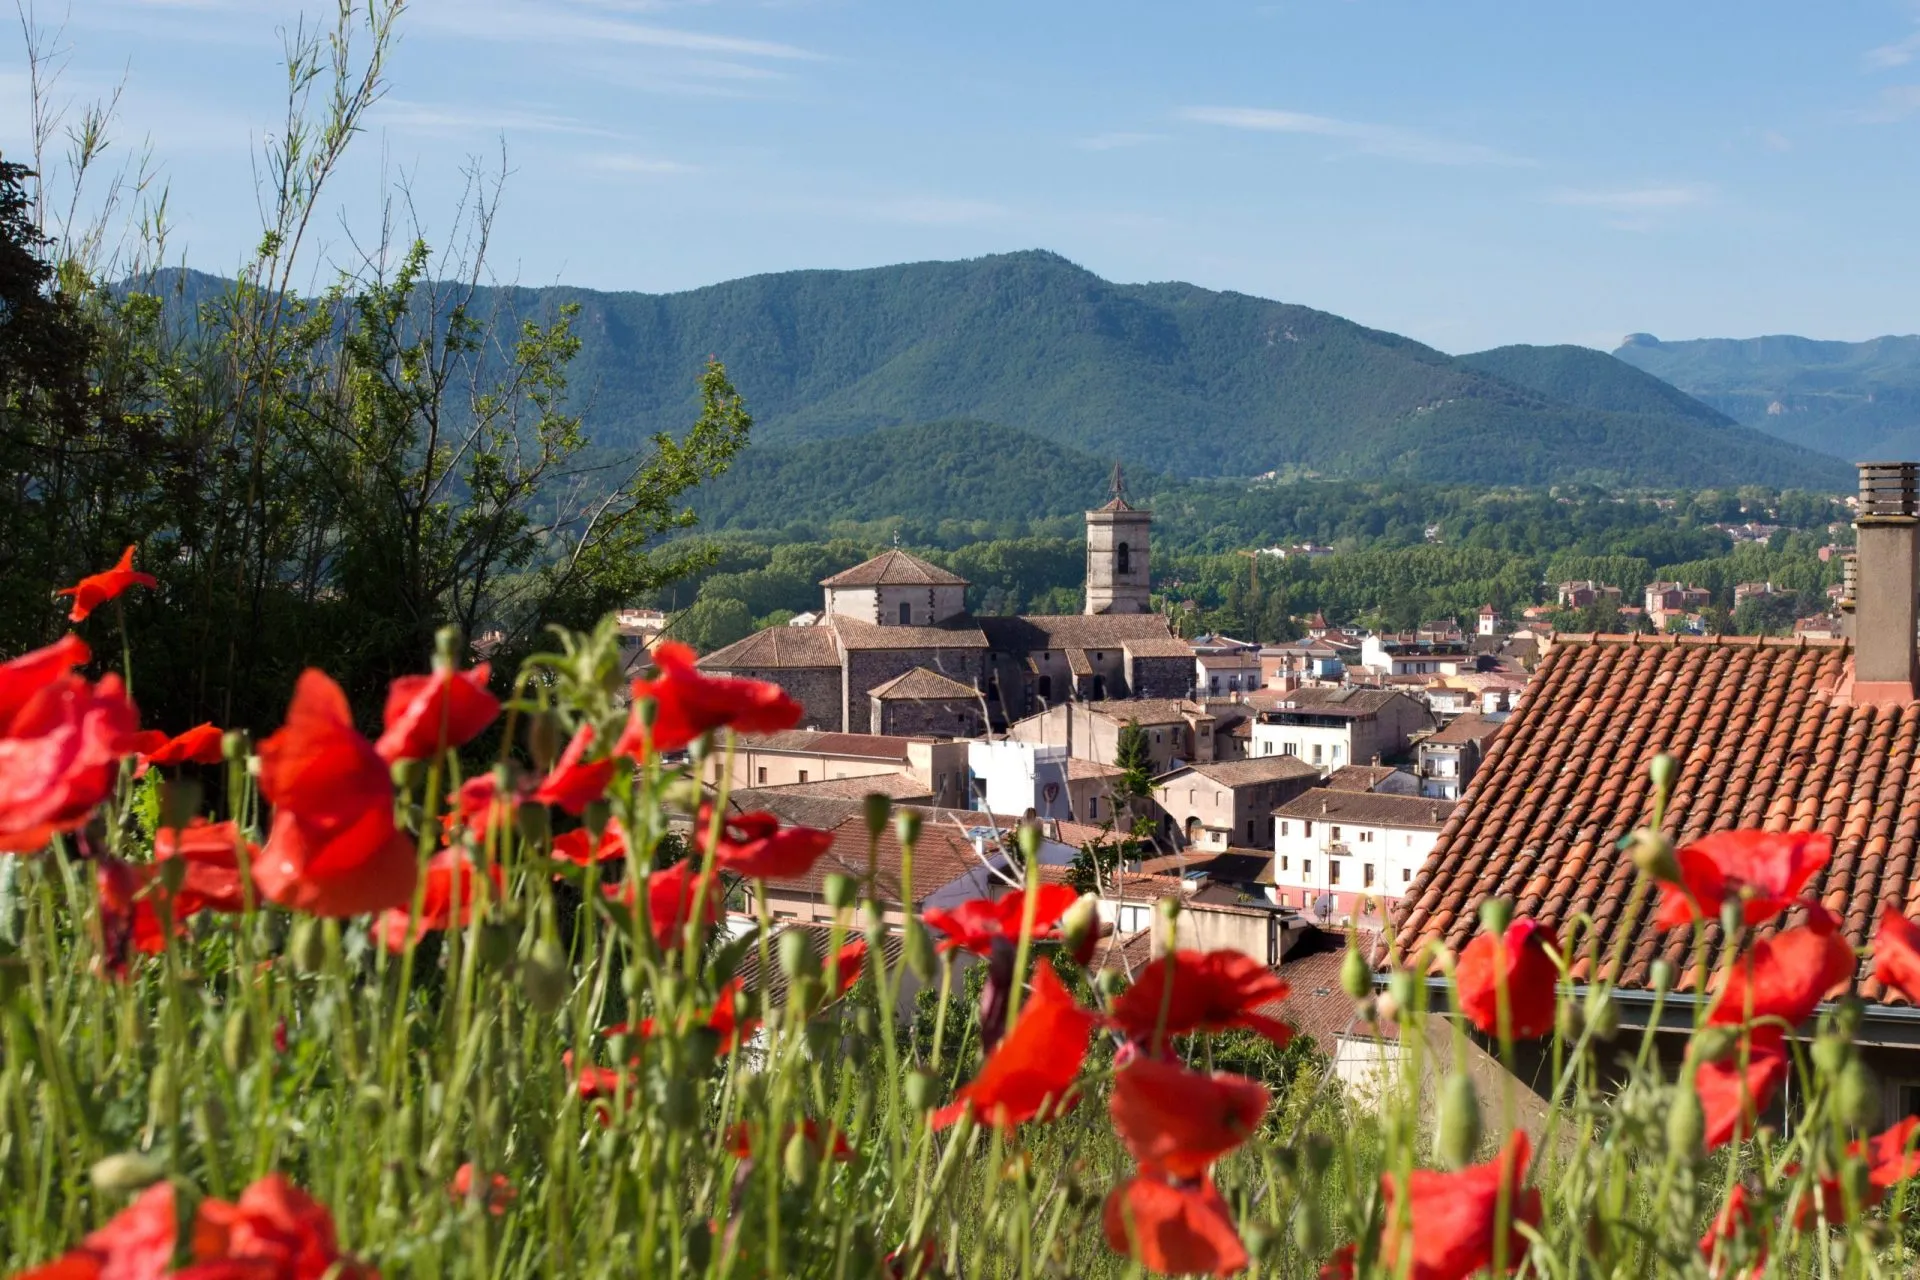 Old town Olot and volcanic mountains with poppy flowers in foreground